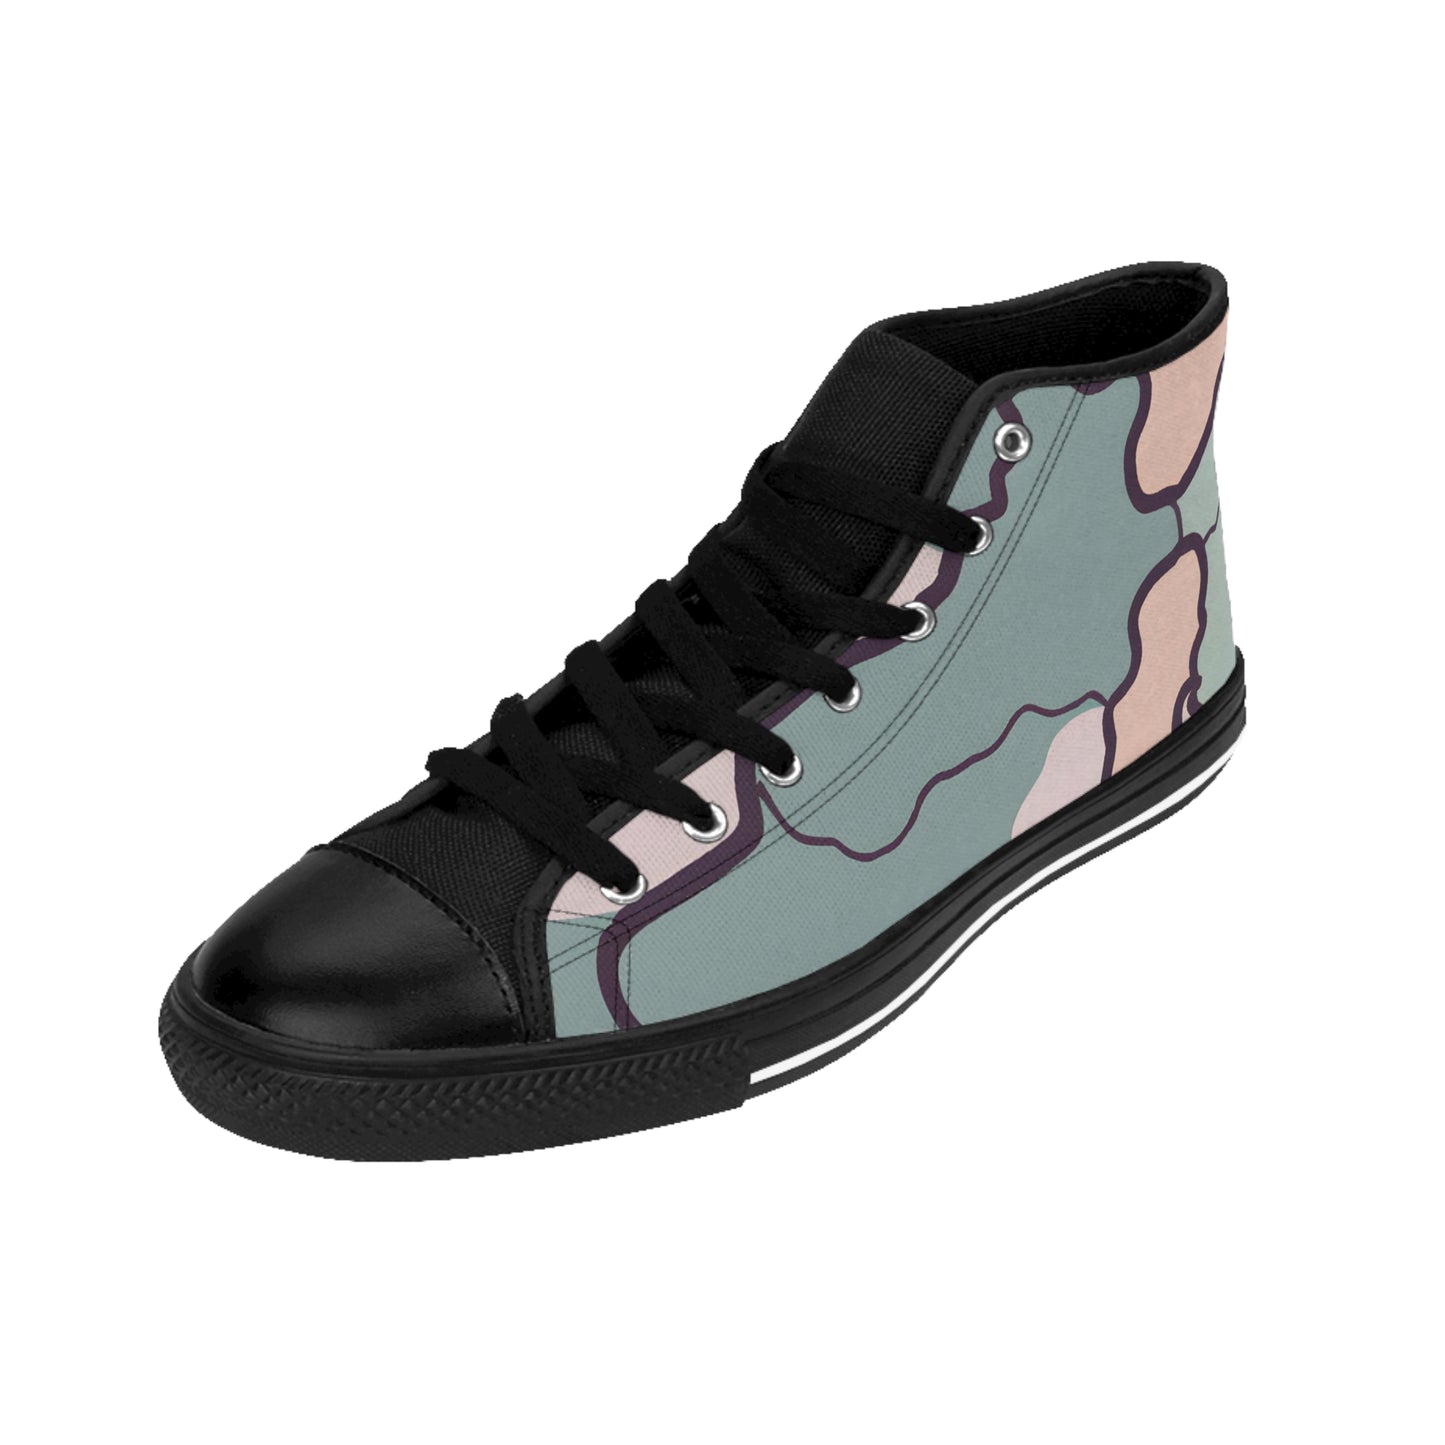 Mitri Charlotte - Women's Classic HIgh-Top Sneakers